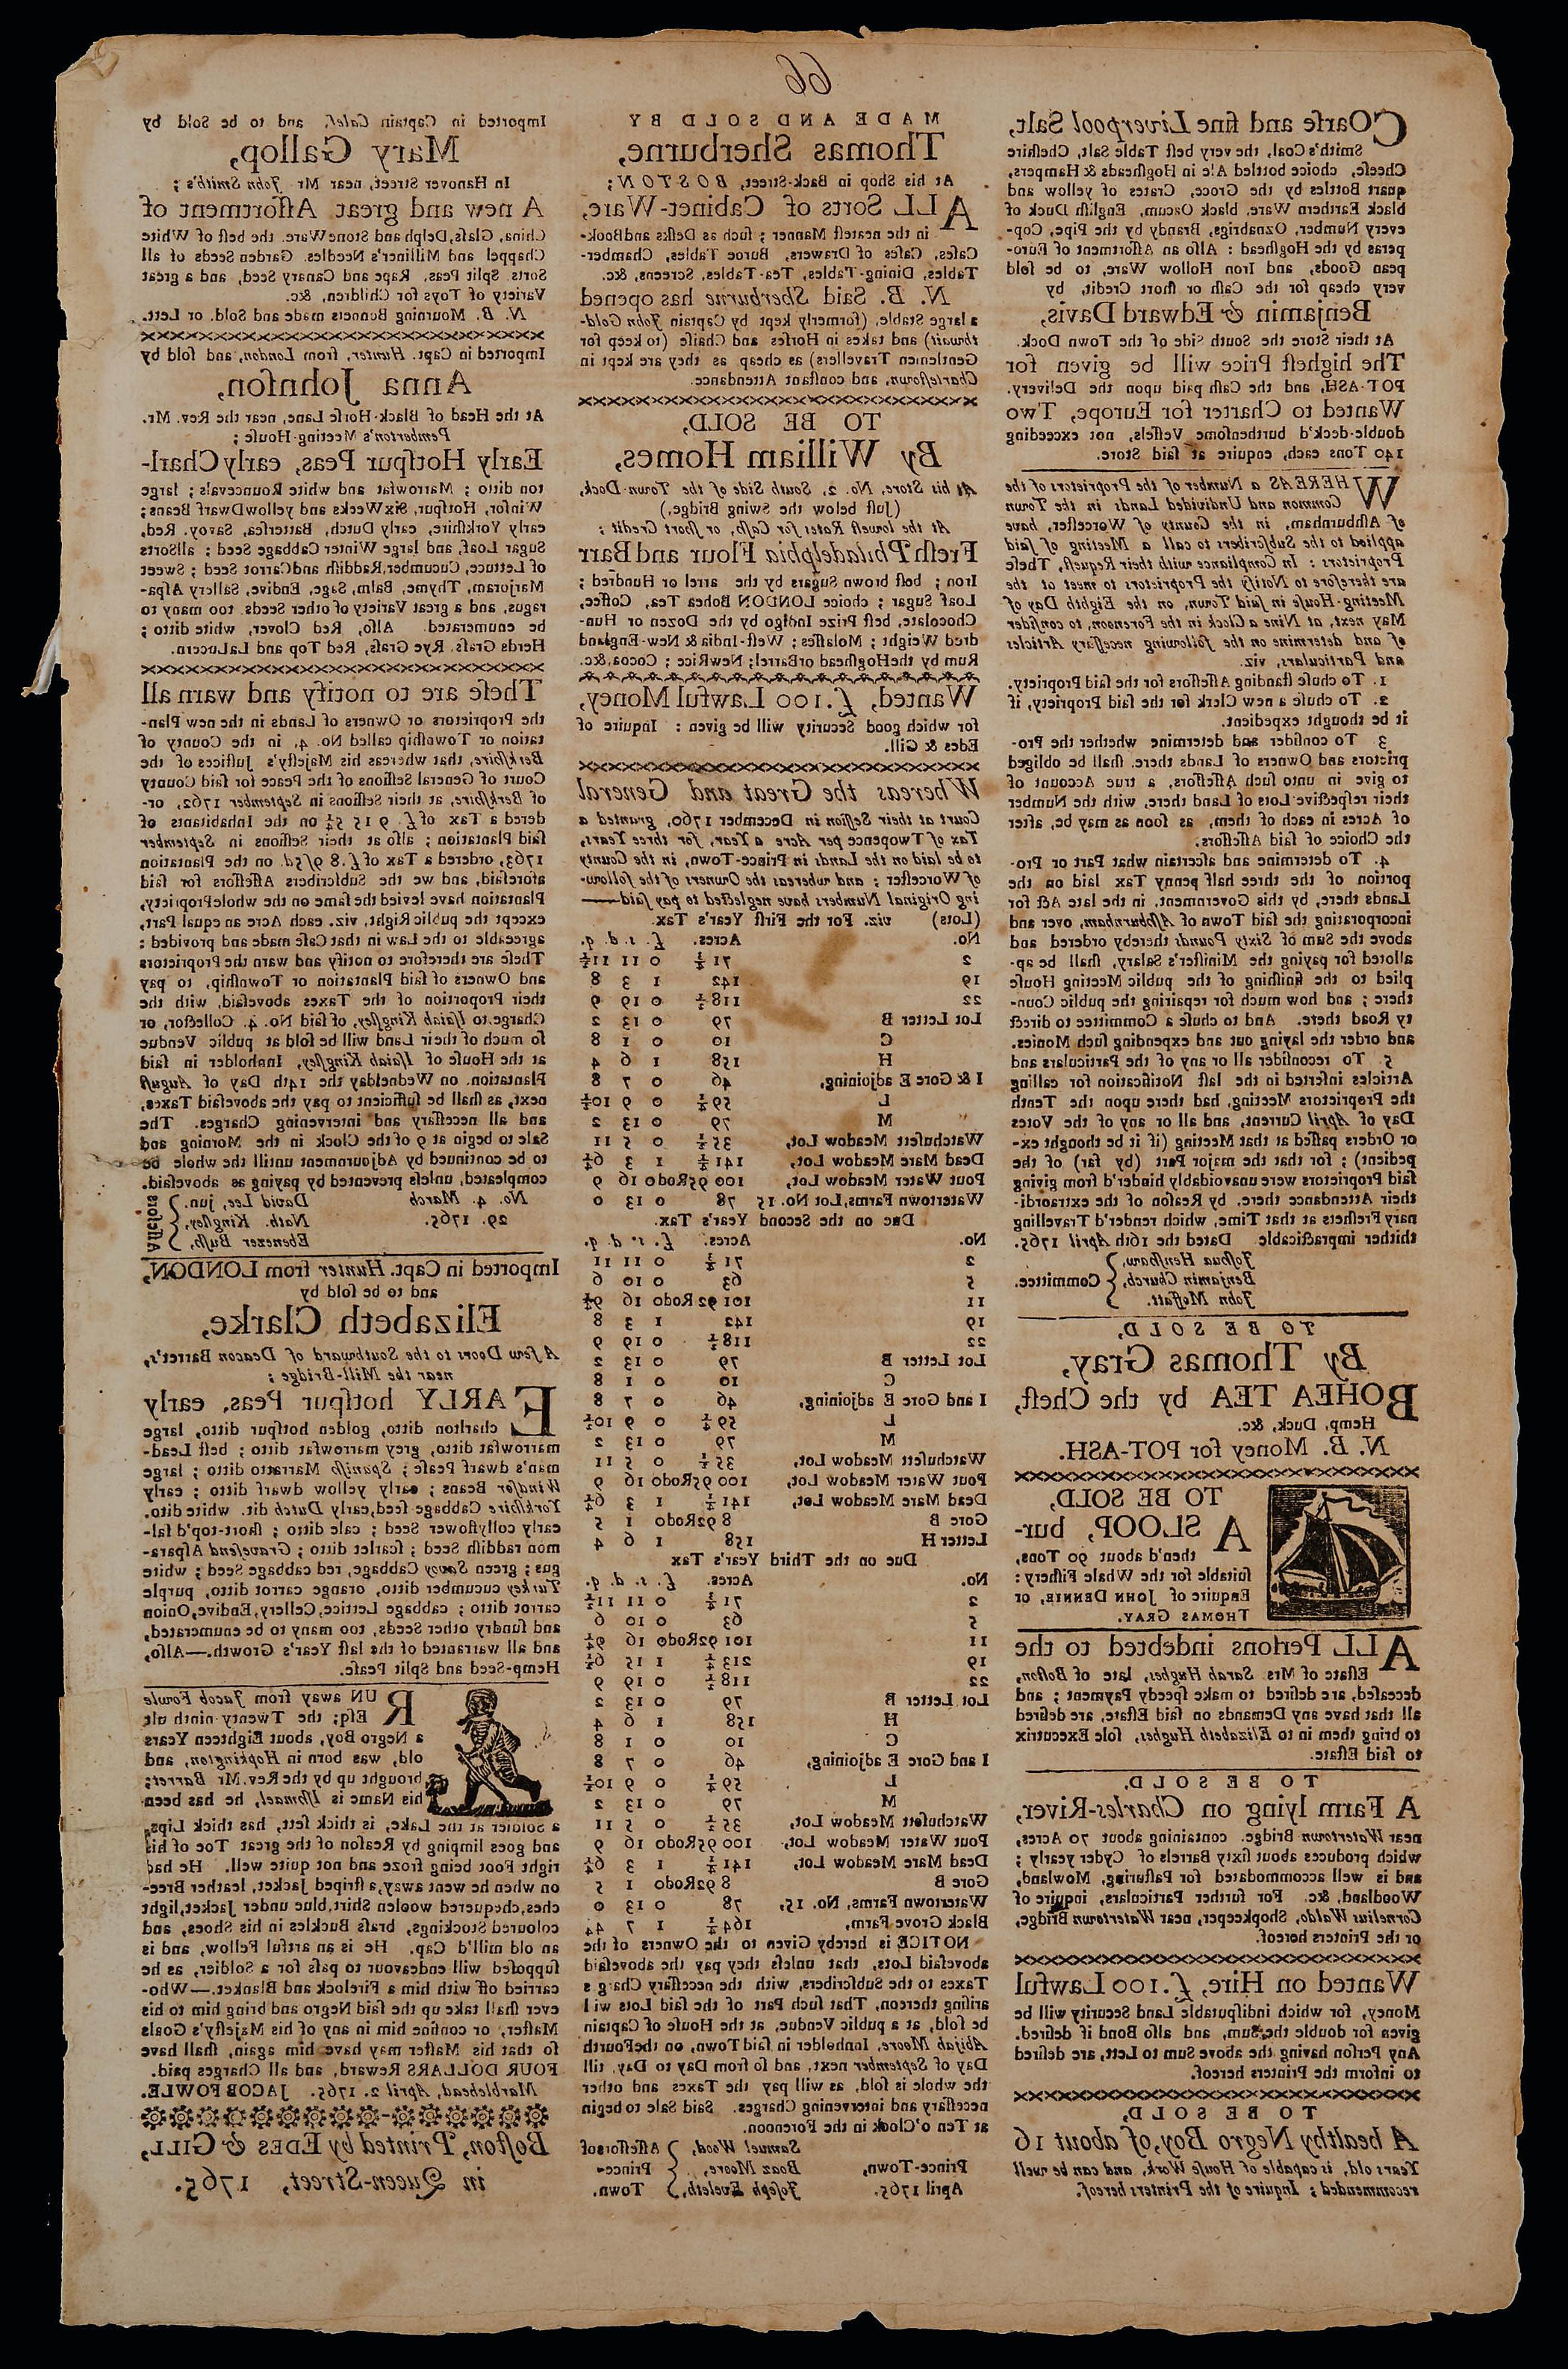 yellowed newspaper with torn edges and black type